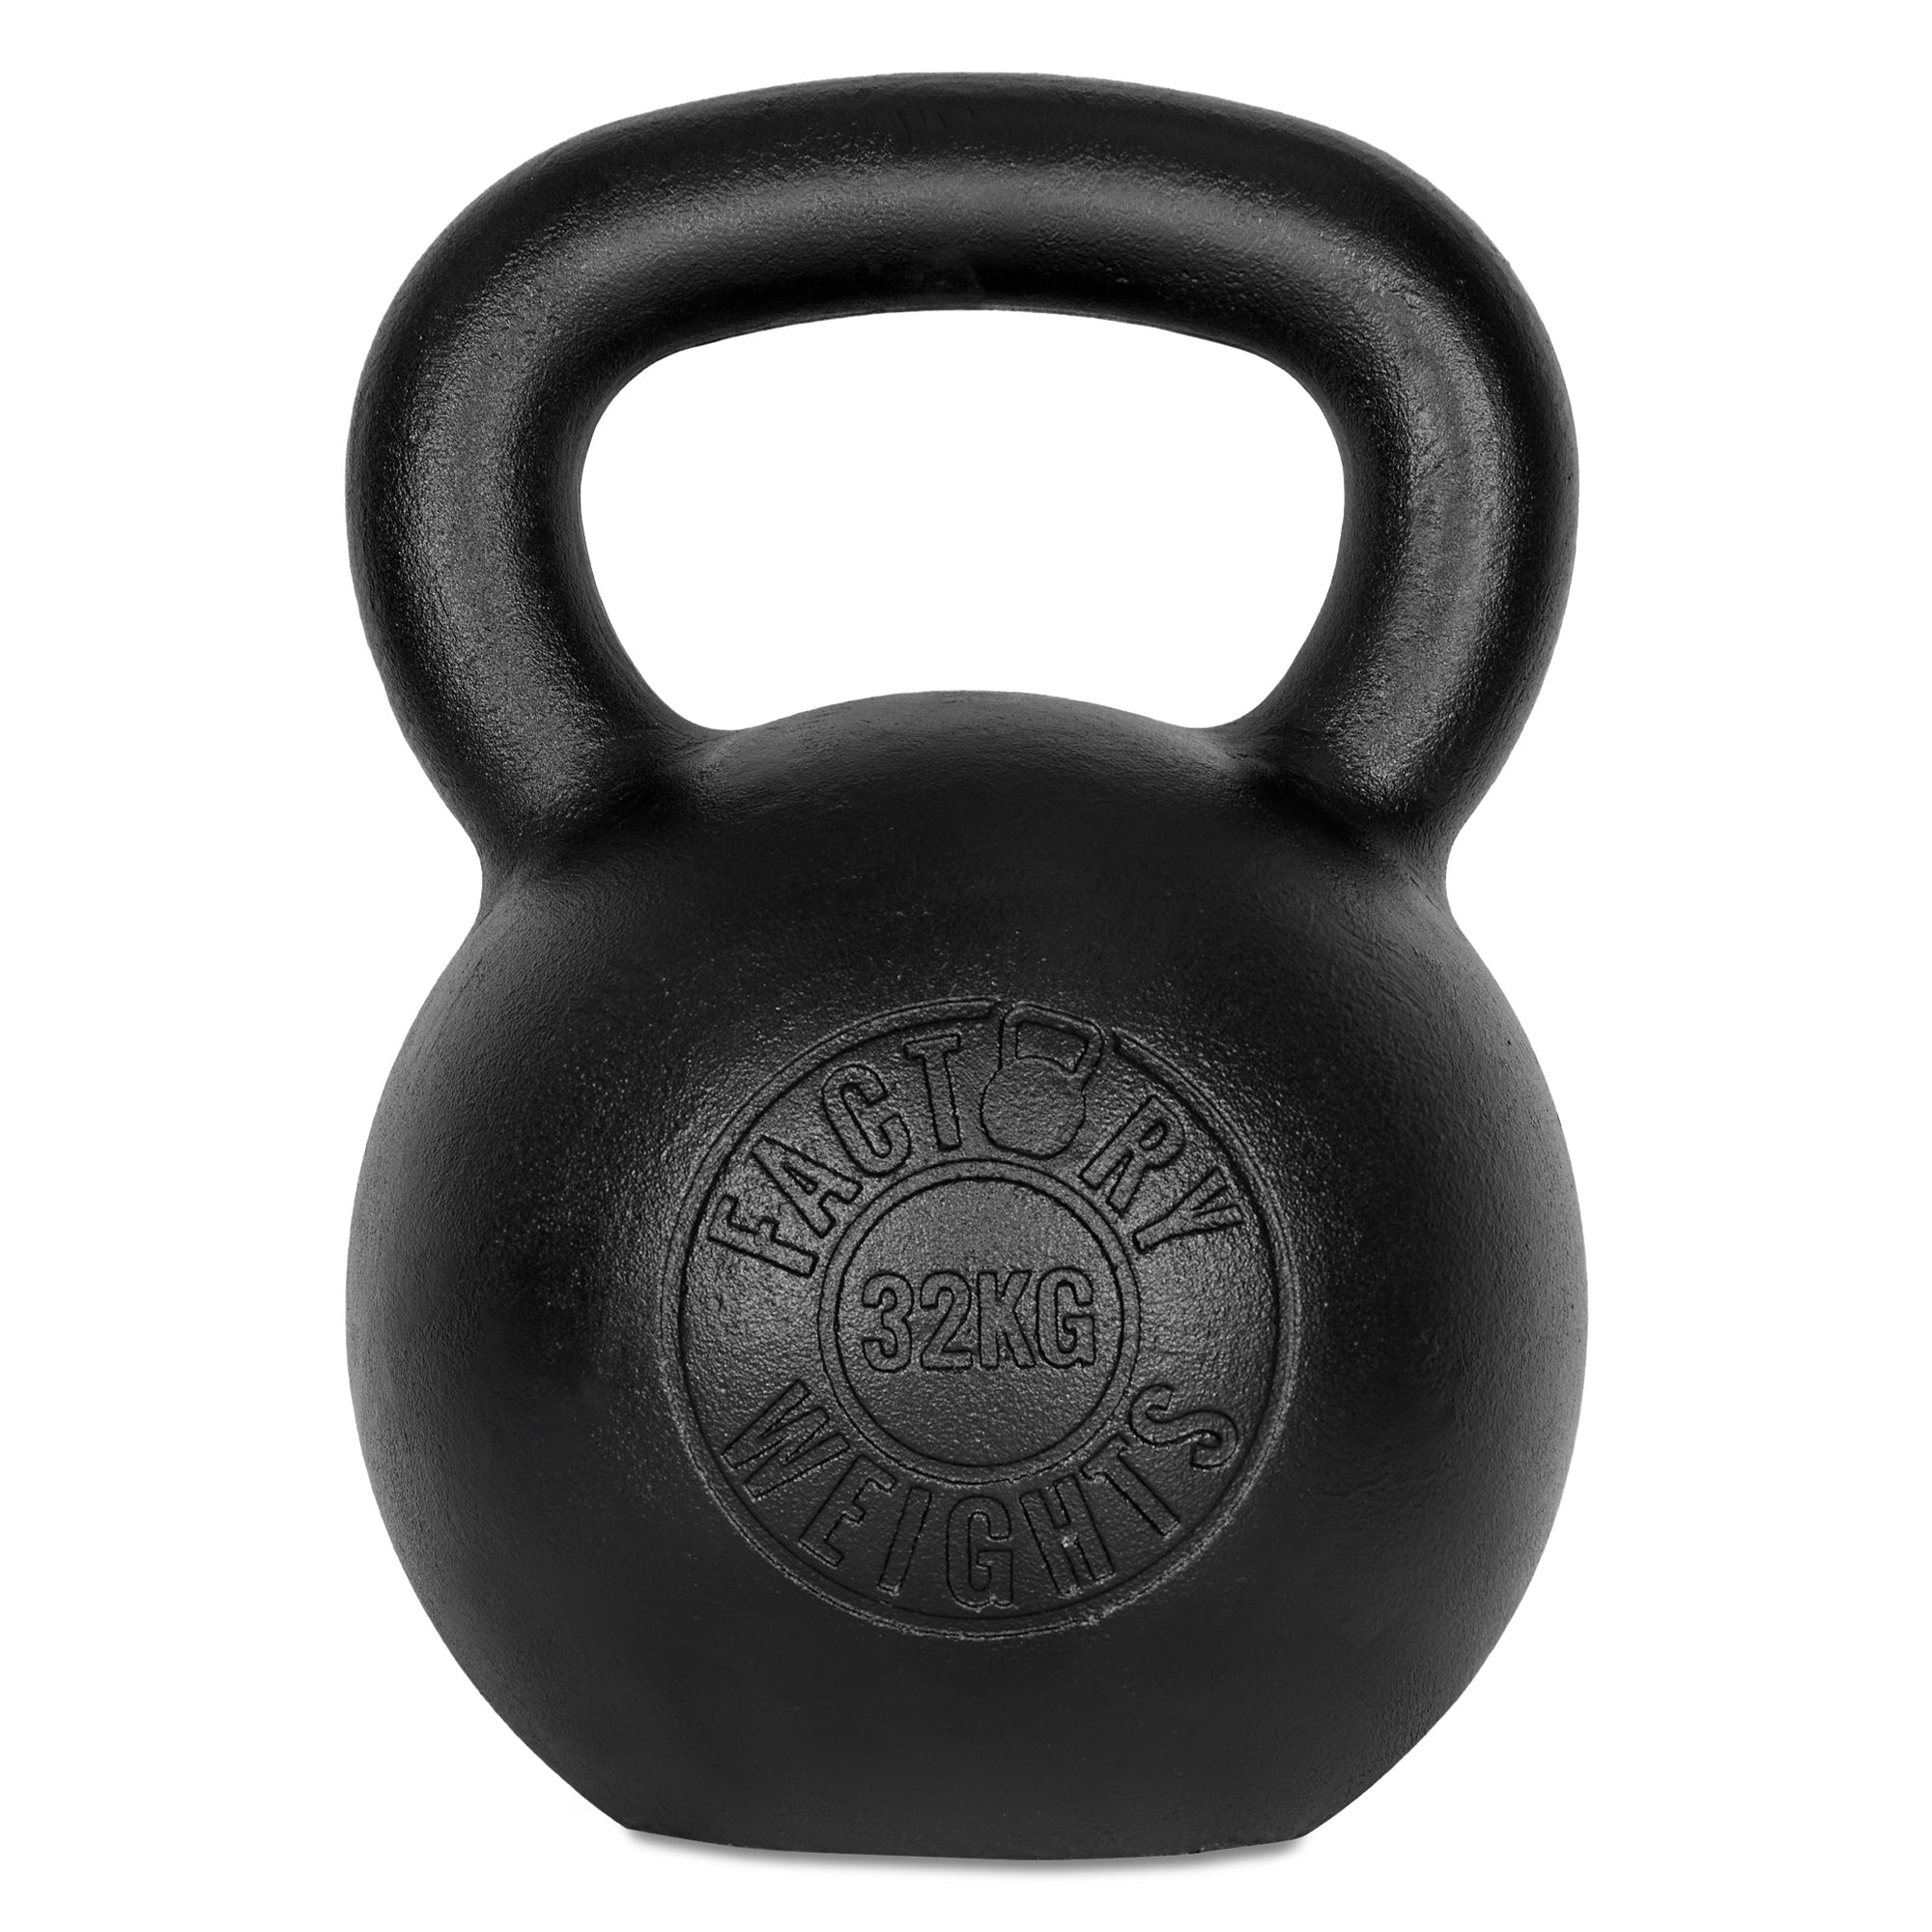 32kg Pro Forged Kettlebell